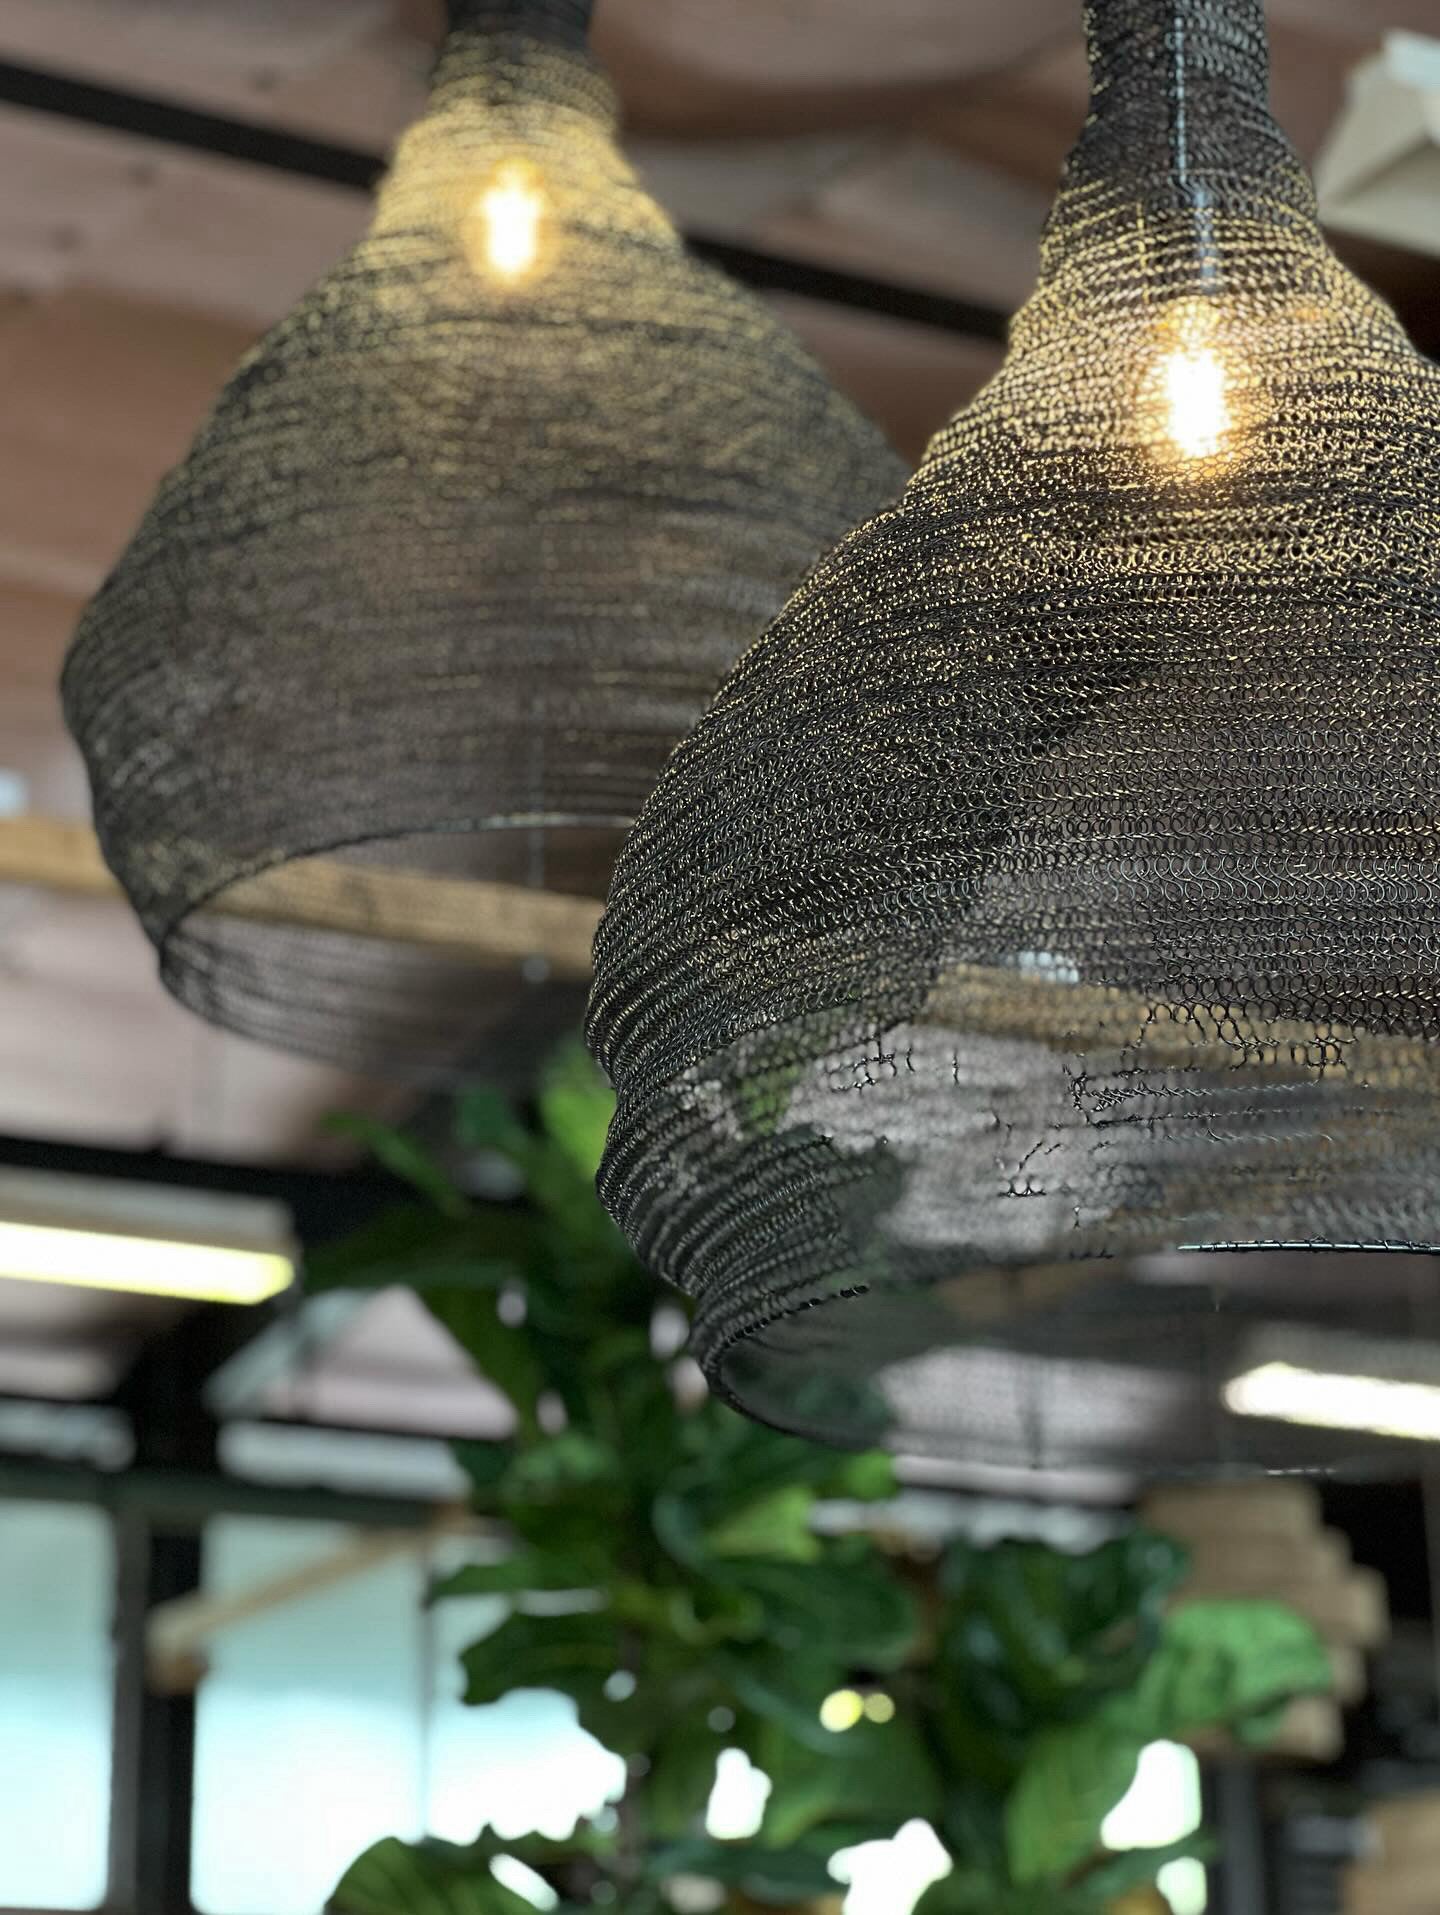 Handcrafted pendant light with a brushed wire design